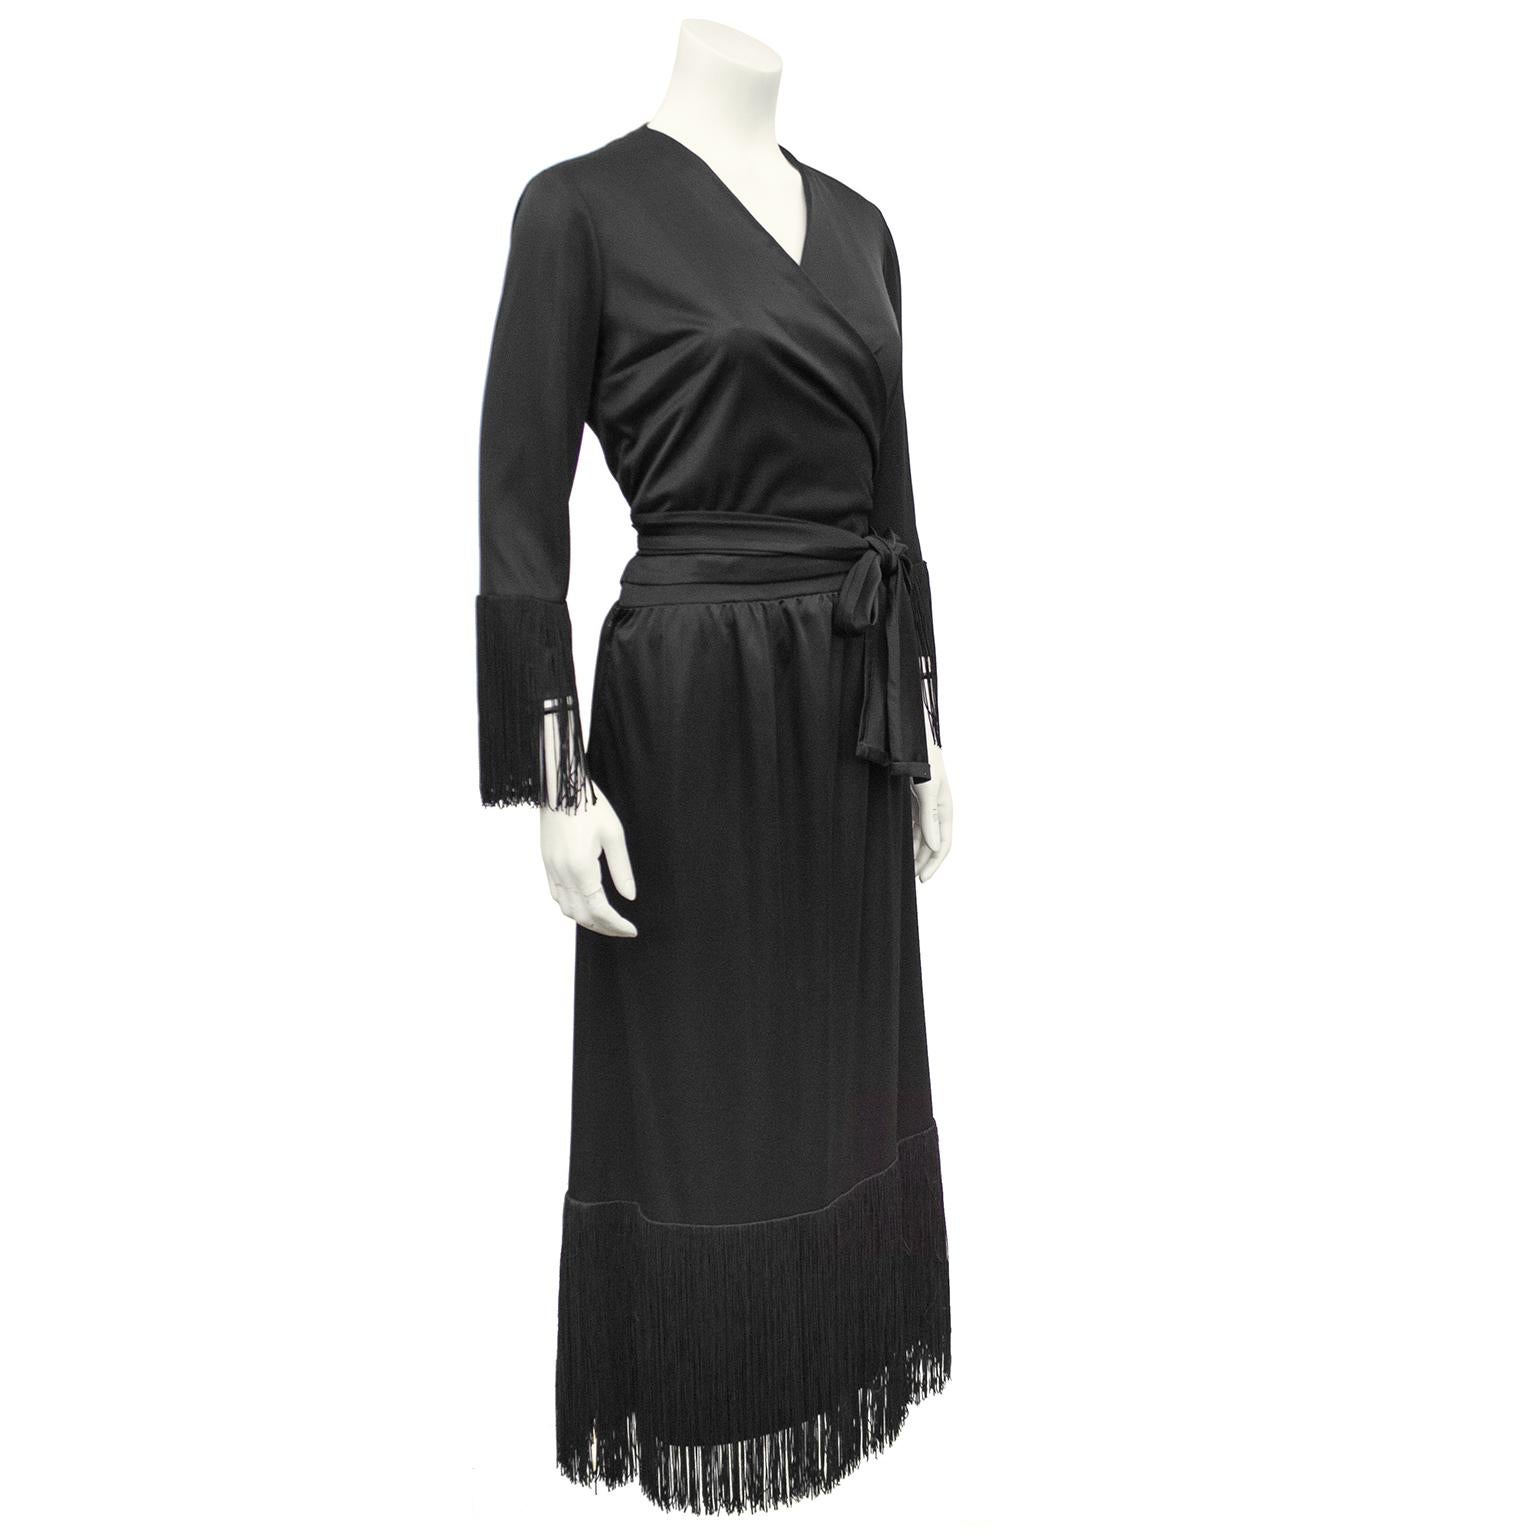 Stunning Givenchy 2 piece set from the 1980s. Black polyester with wrap style with large sash at waist that can be tied to your liking. Long fringe trim at wrists and hem. V neck. Excellent vintage condition. Fits like a US size 6.